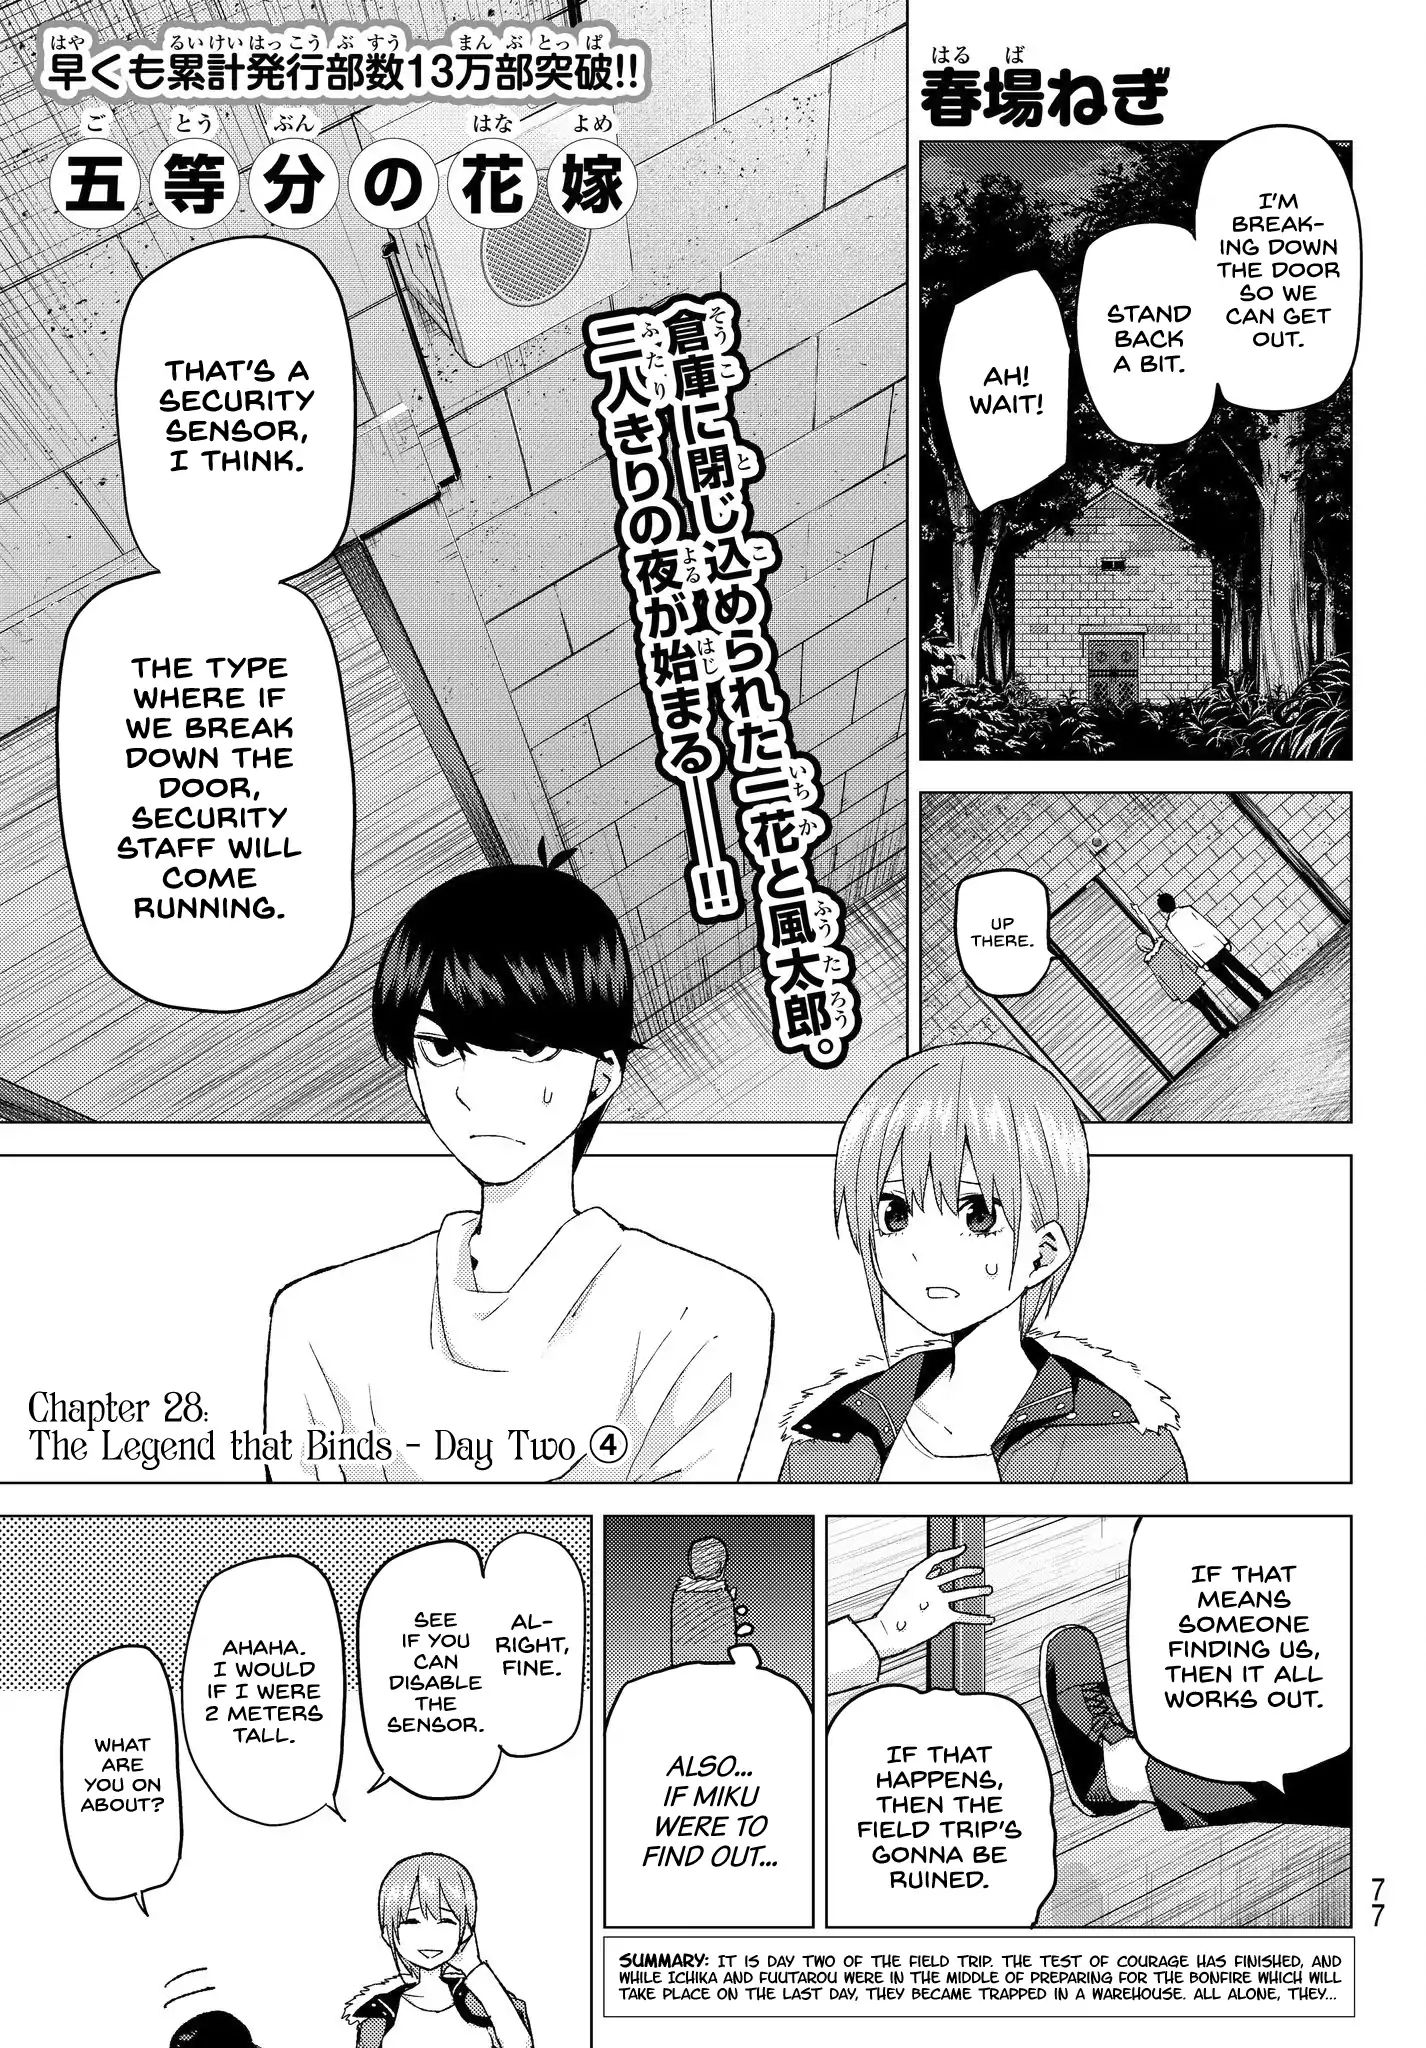 Go-Toubun No Hanayome Vol.4 Chapter 28: The Legend That Binds - Day Two (4) - Picture 1